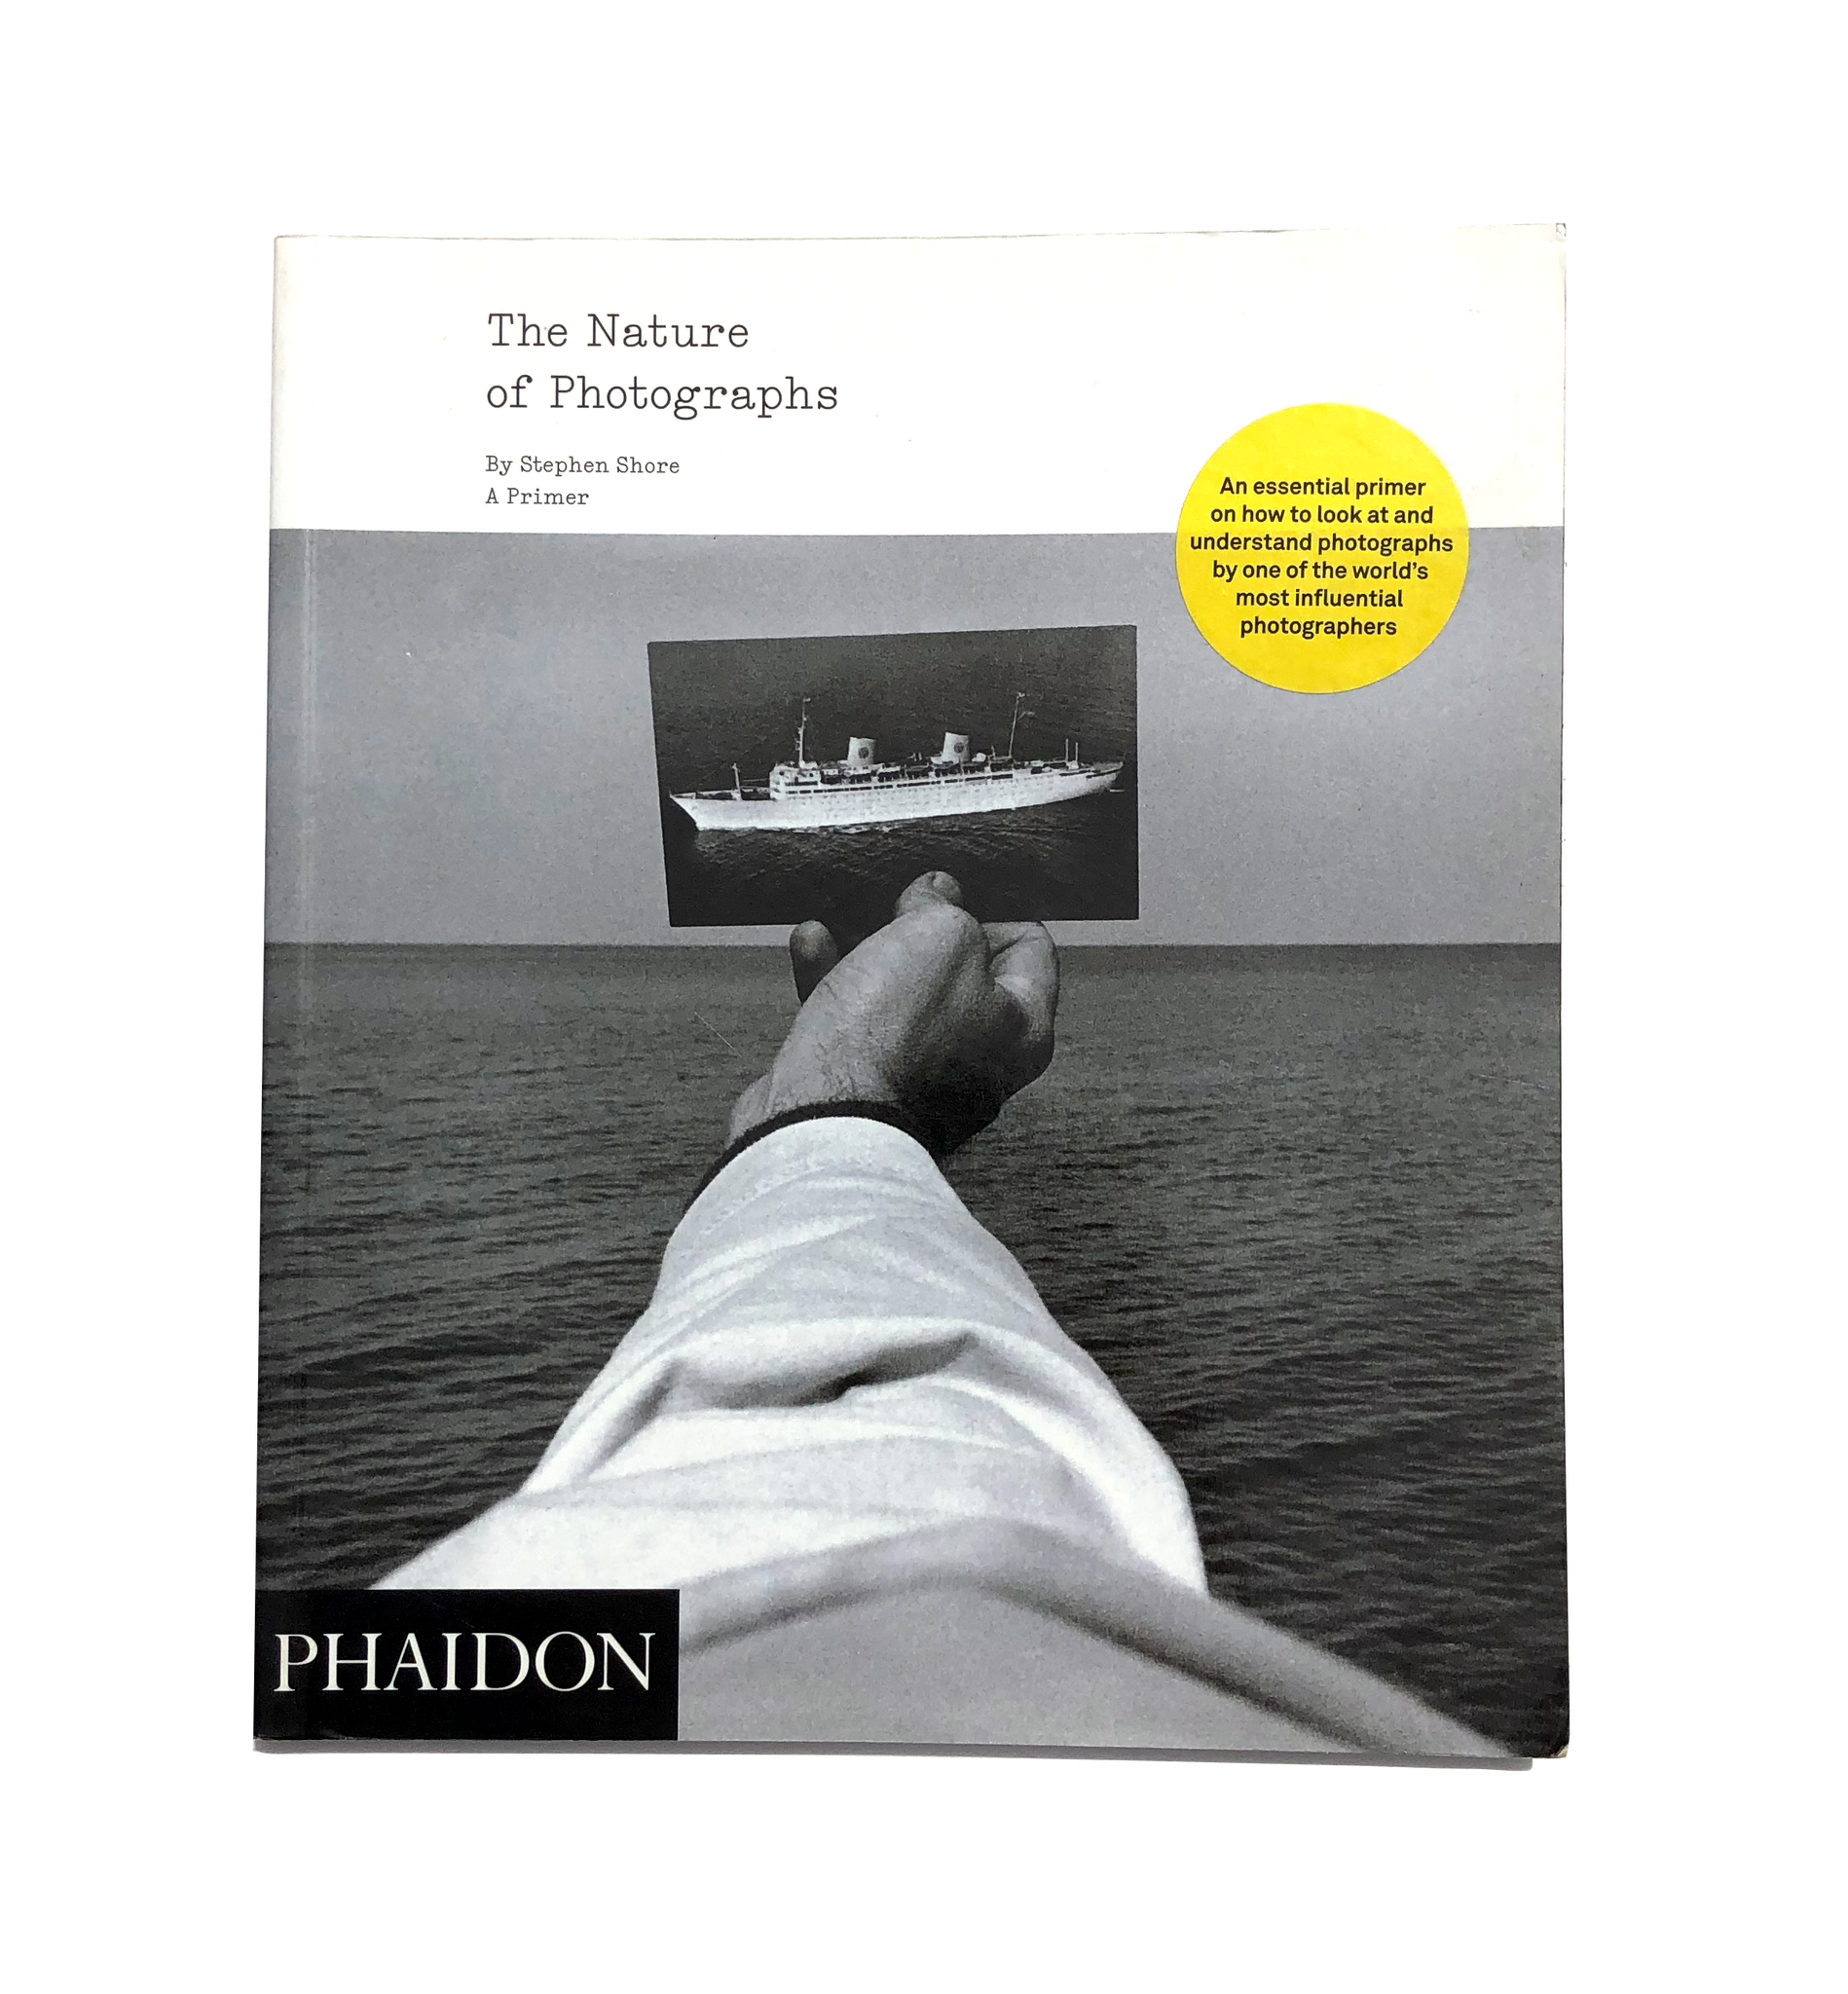 Stephen Shore: The Nature of Photographs